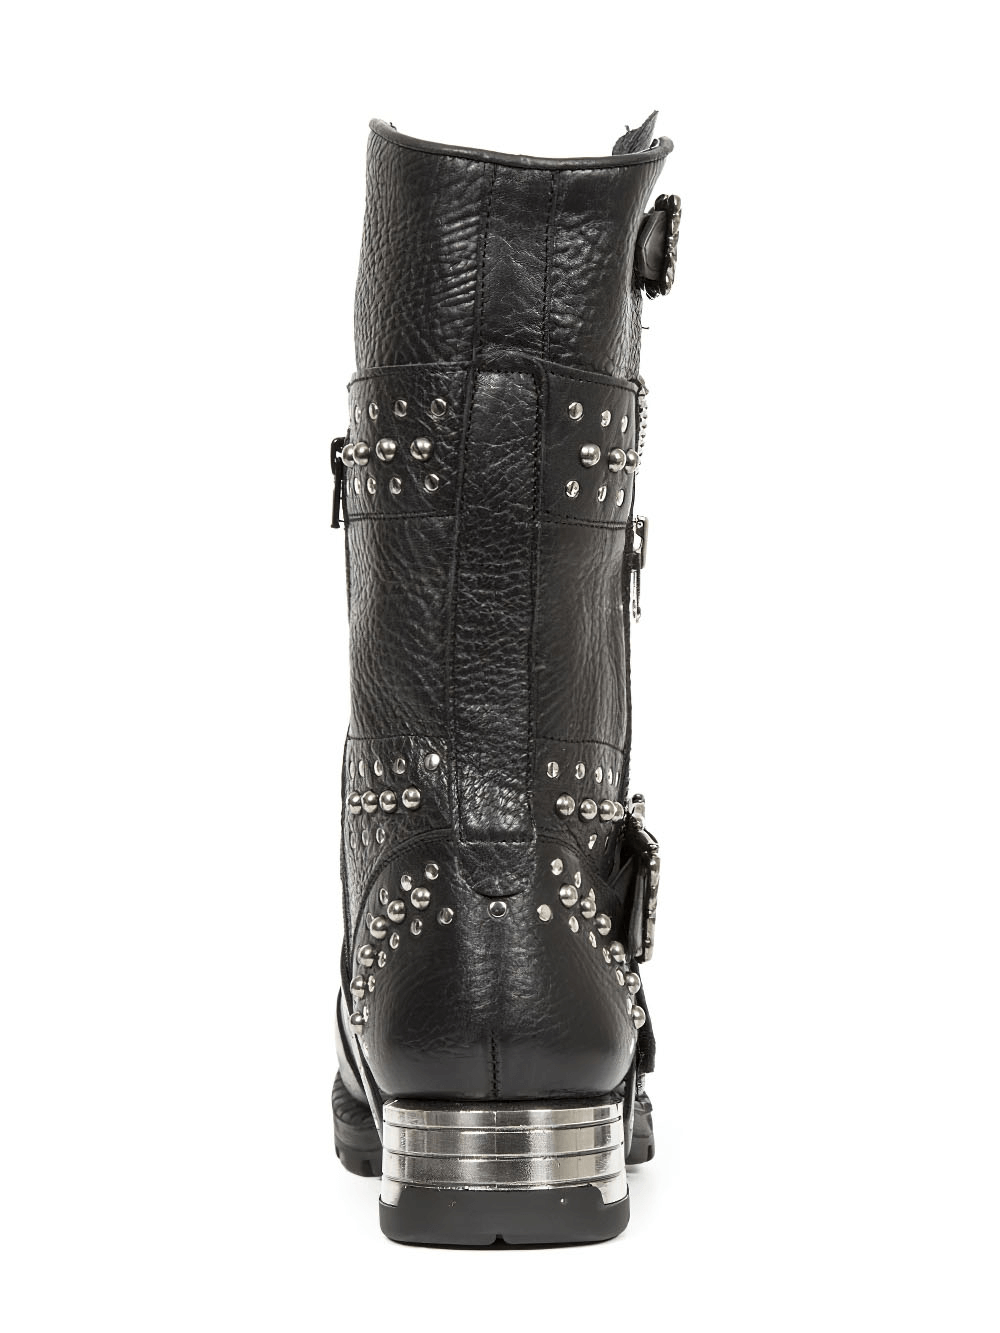 NEW ROCK Leather Biker Boots with Zipper and Rivets